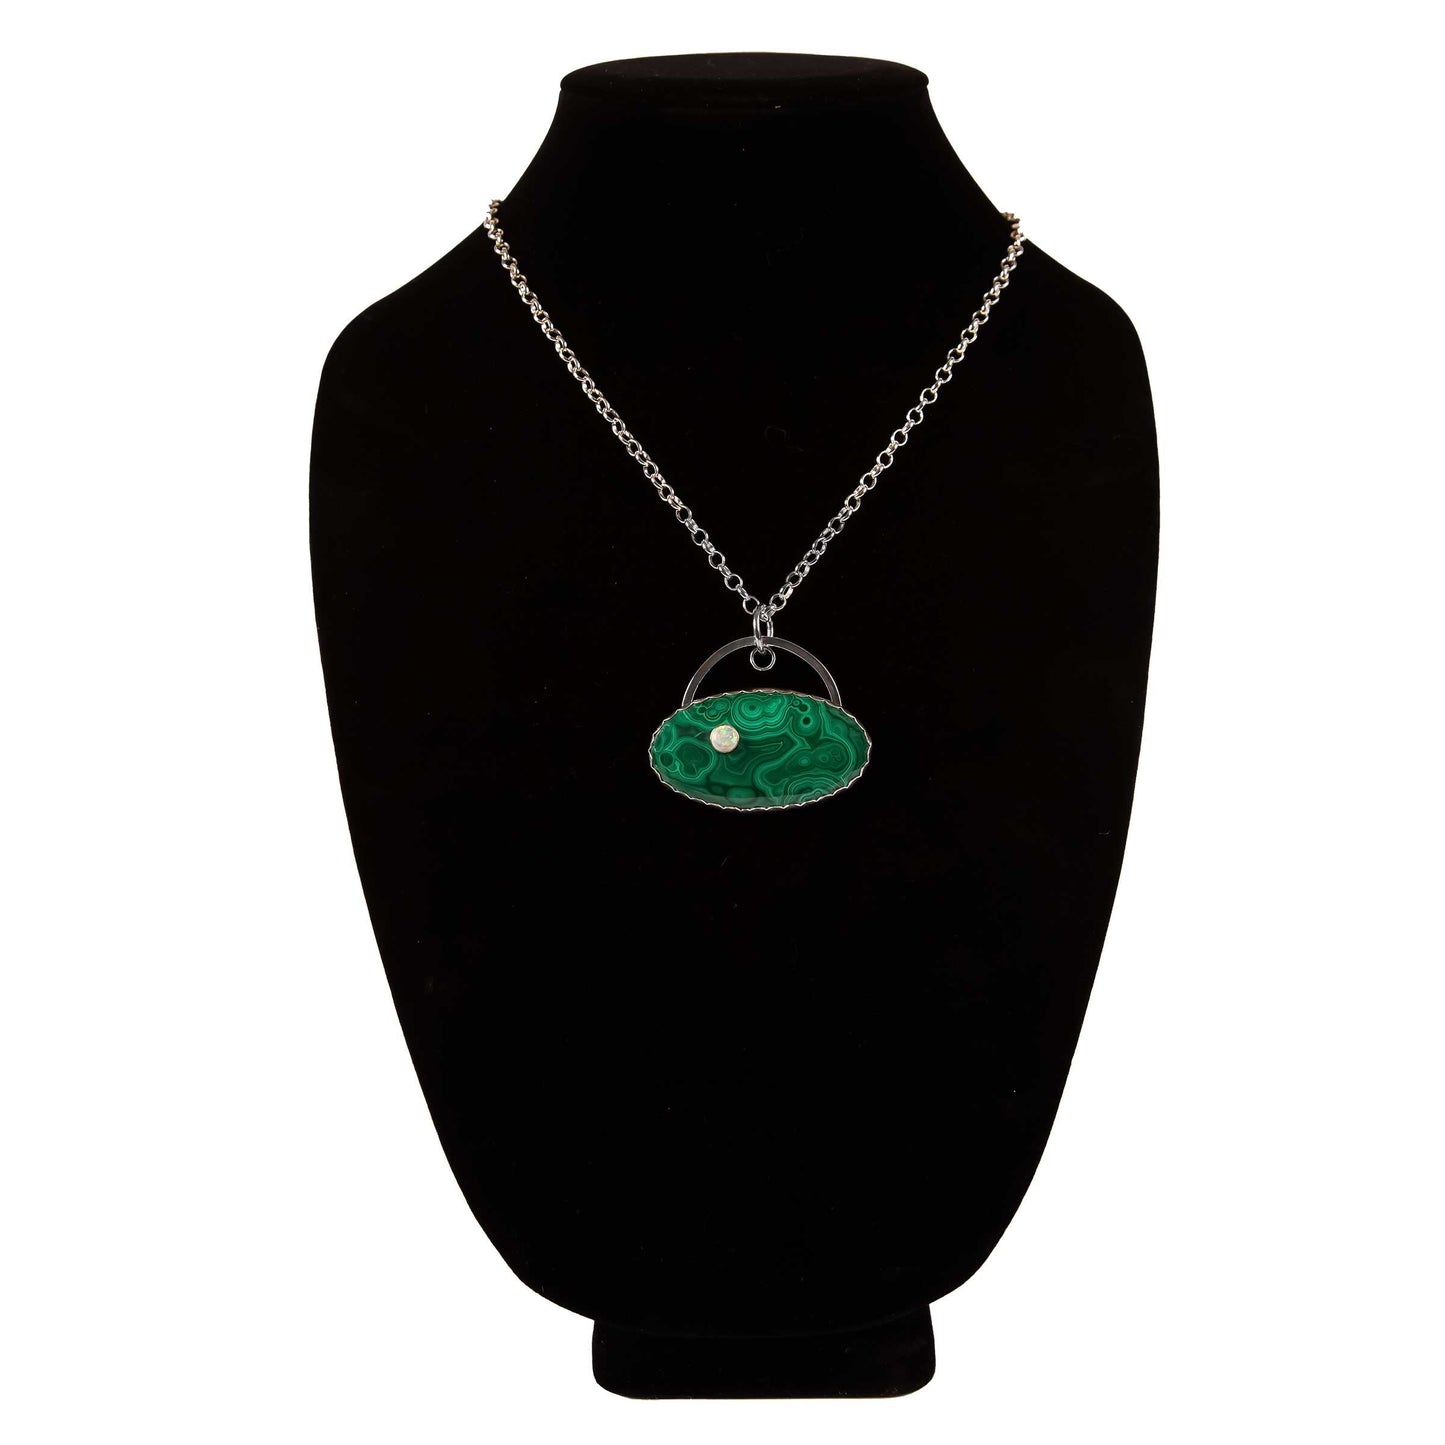 Green Malachite,  white opal, sterling silver, textured back, 20-inch Rolo chain and clasp, 2" x 1.75"